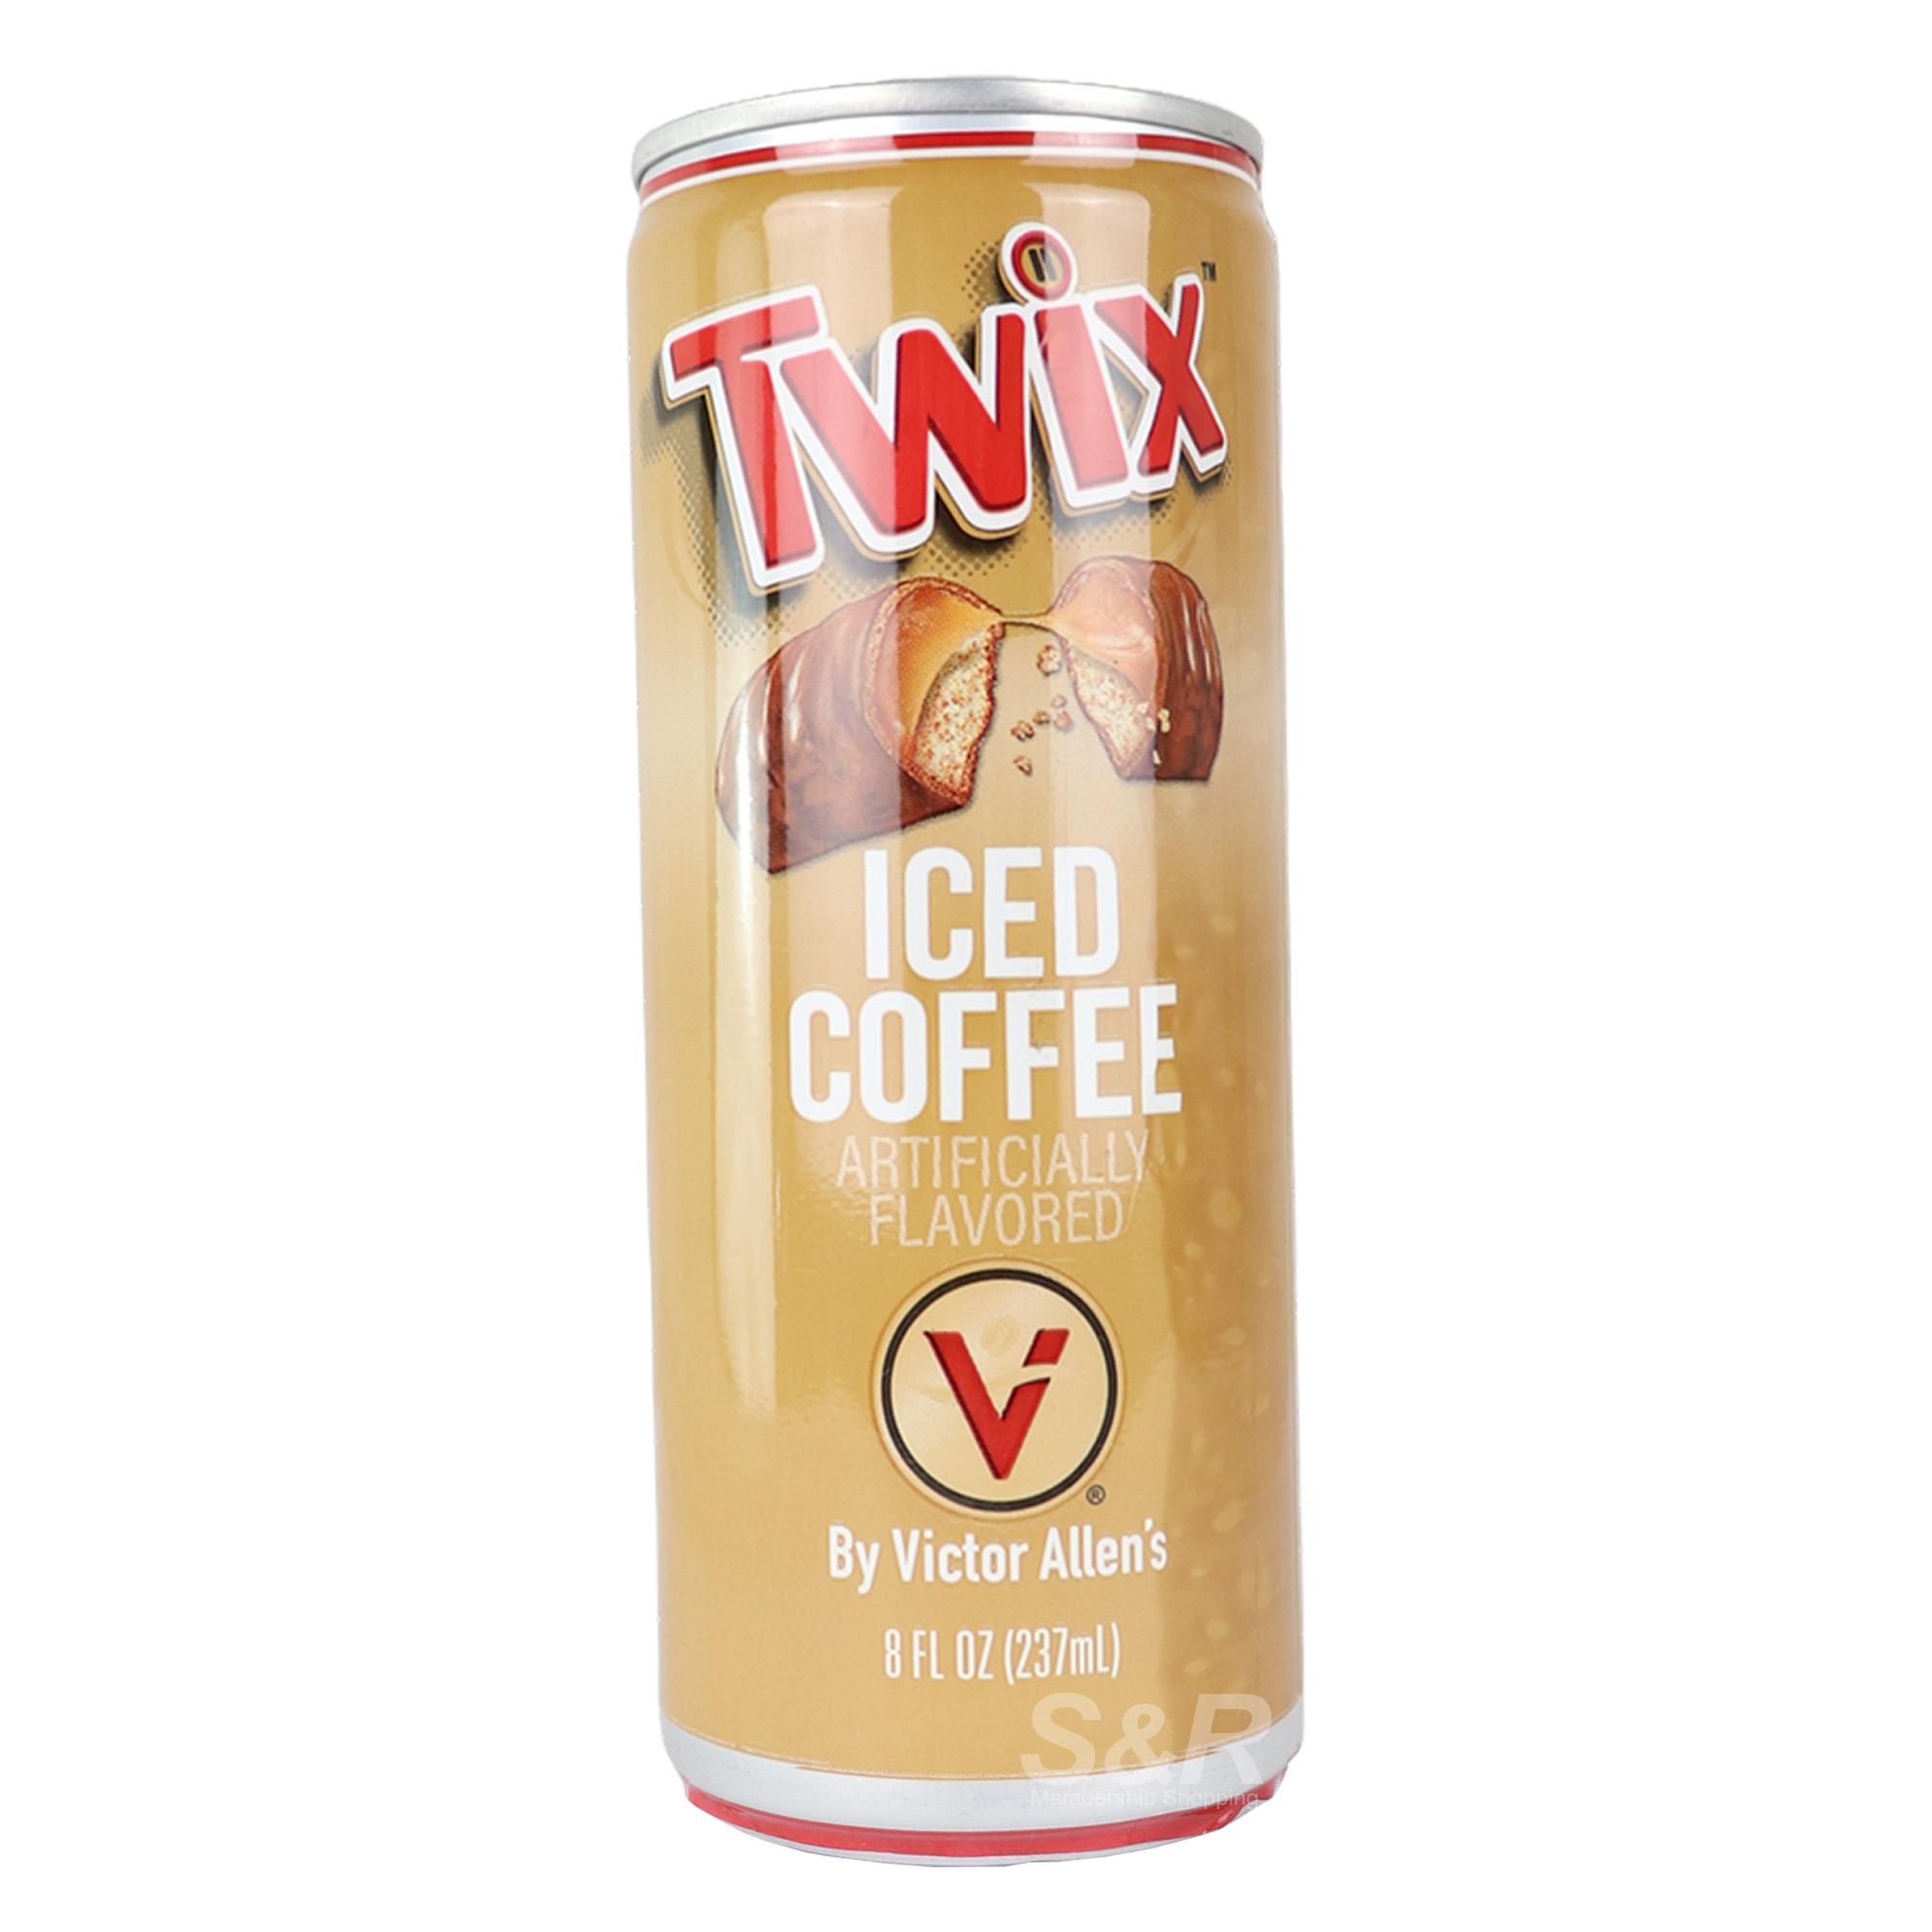 Twix Iced Coffee Artificially Flavored by Victor Allen 237mL